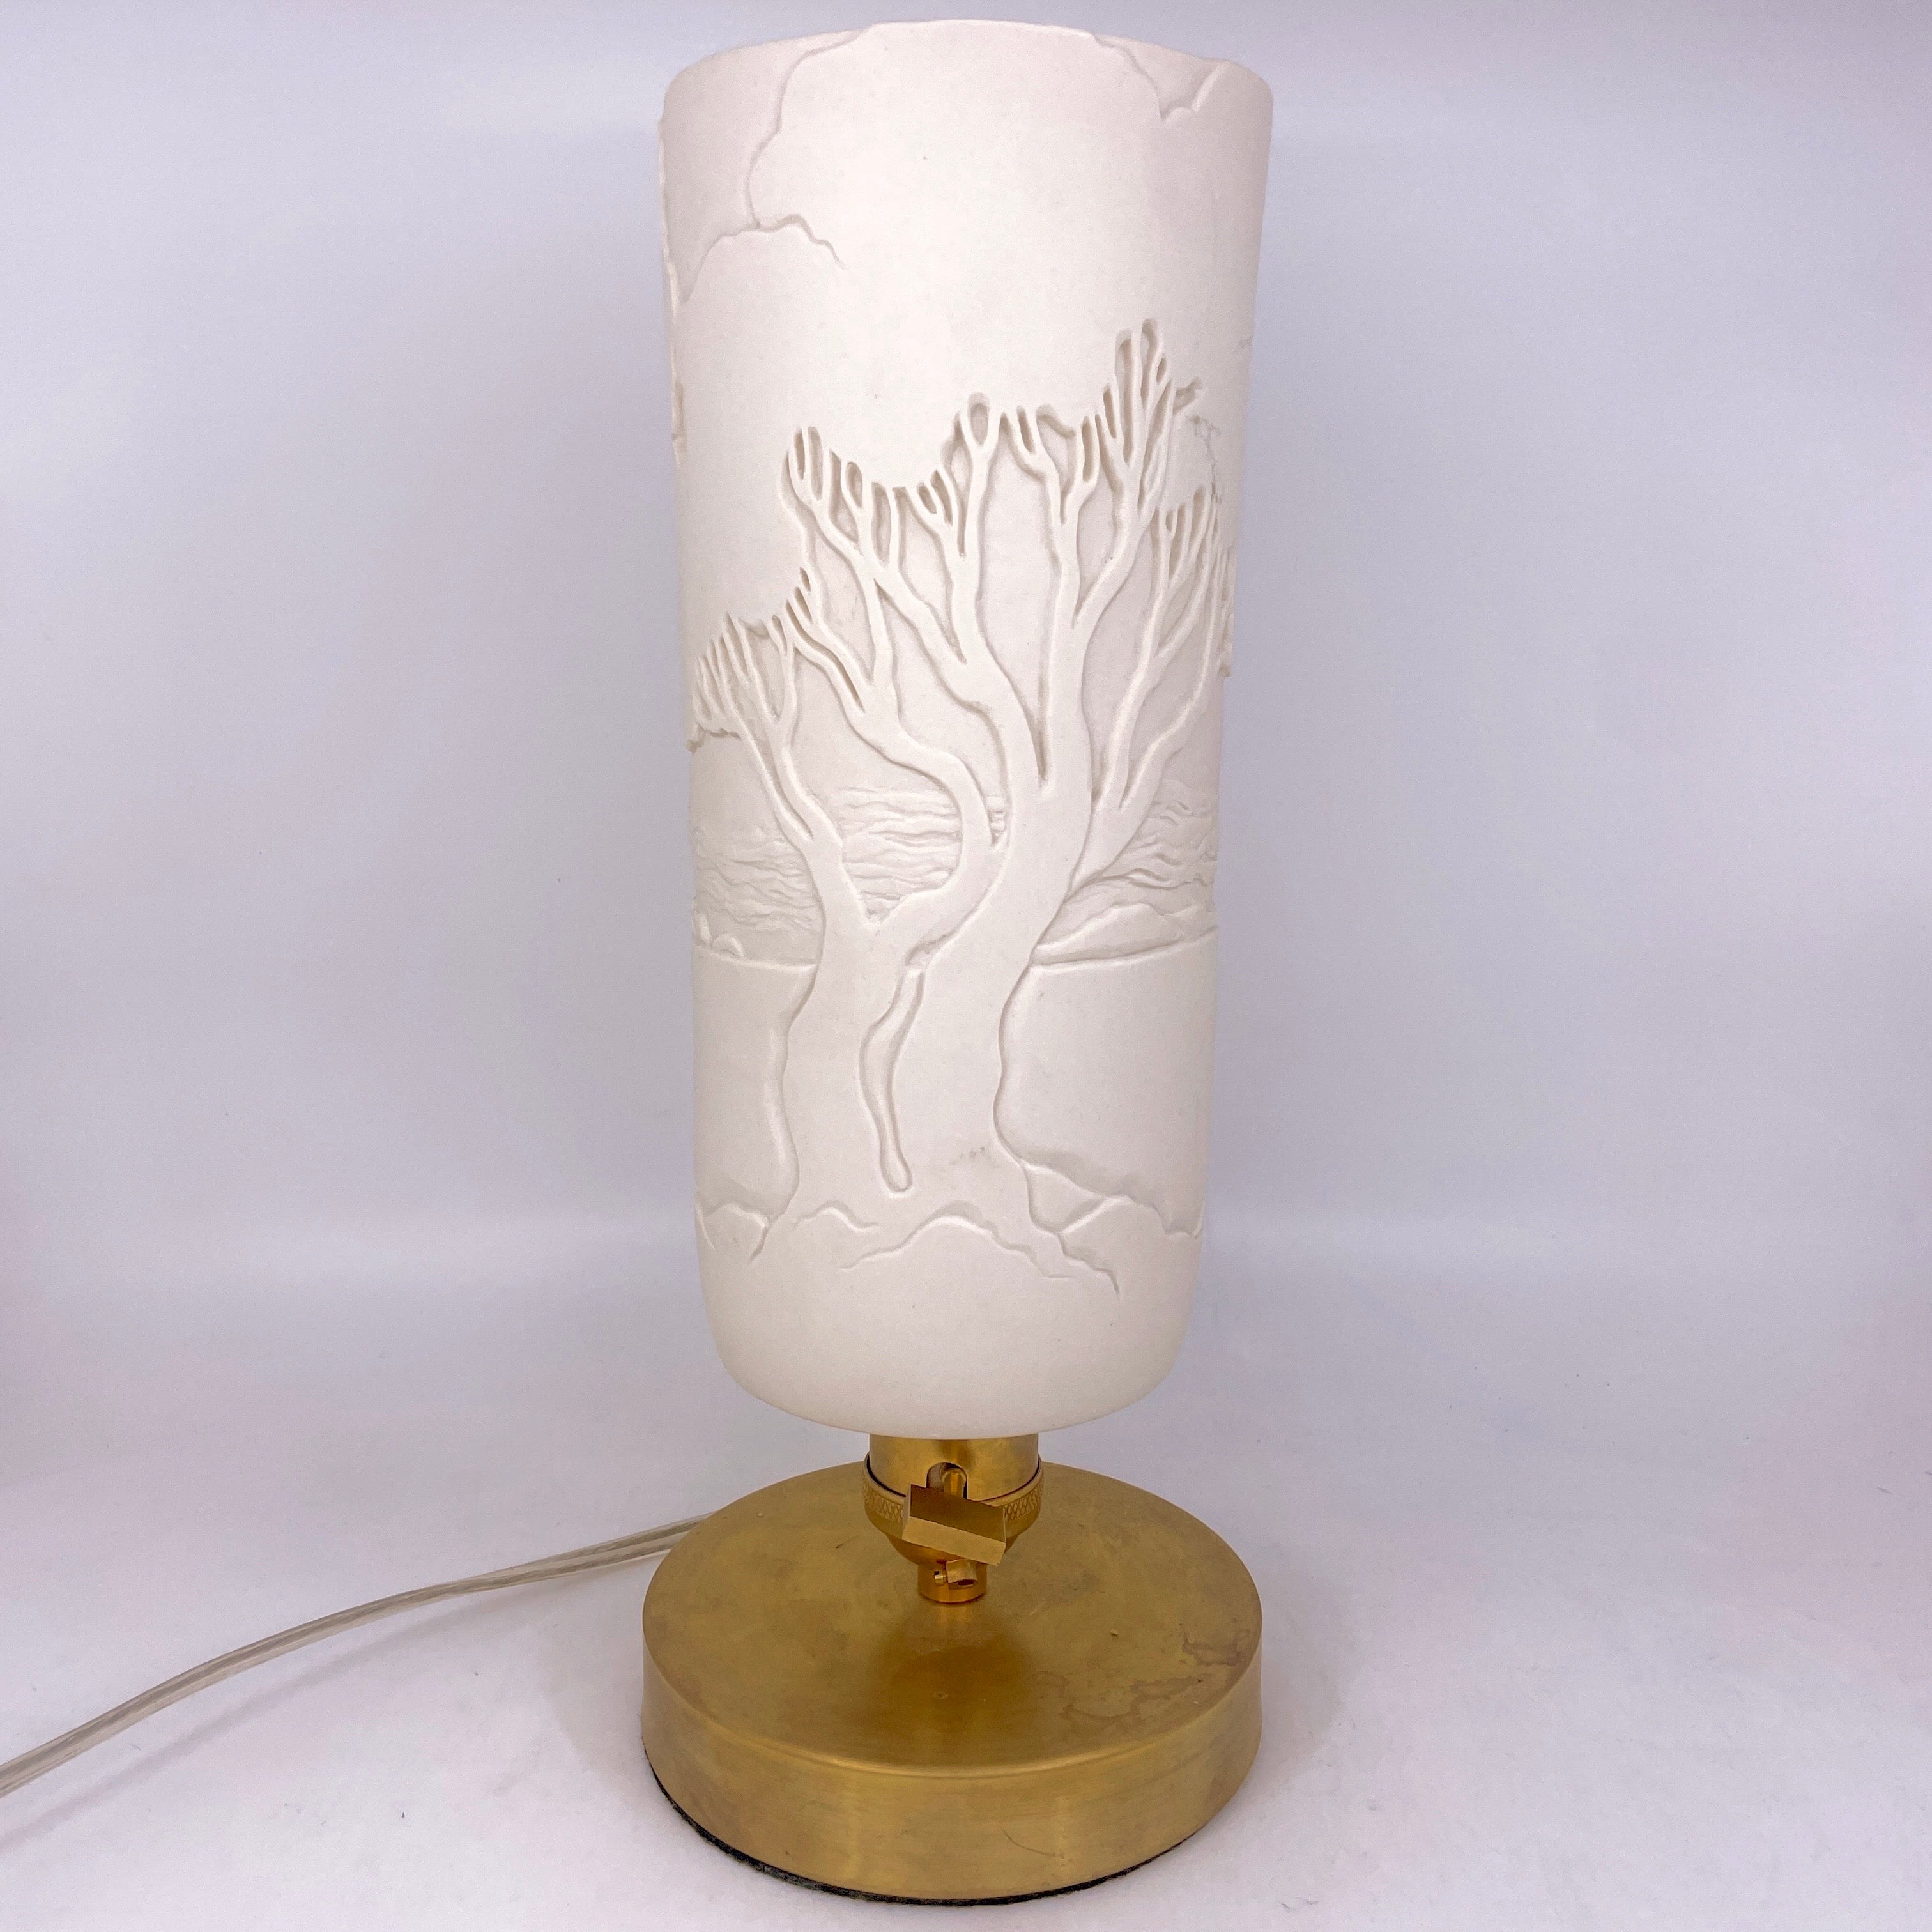 Table Lamp Installment- Madrona” hand-carved White Porcelain Shade and Choice of Base (ready to ship) Collaboration with Mary Jane Elgin